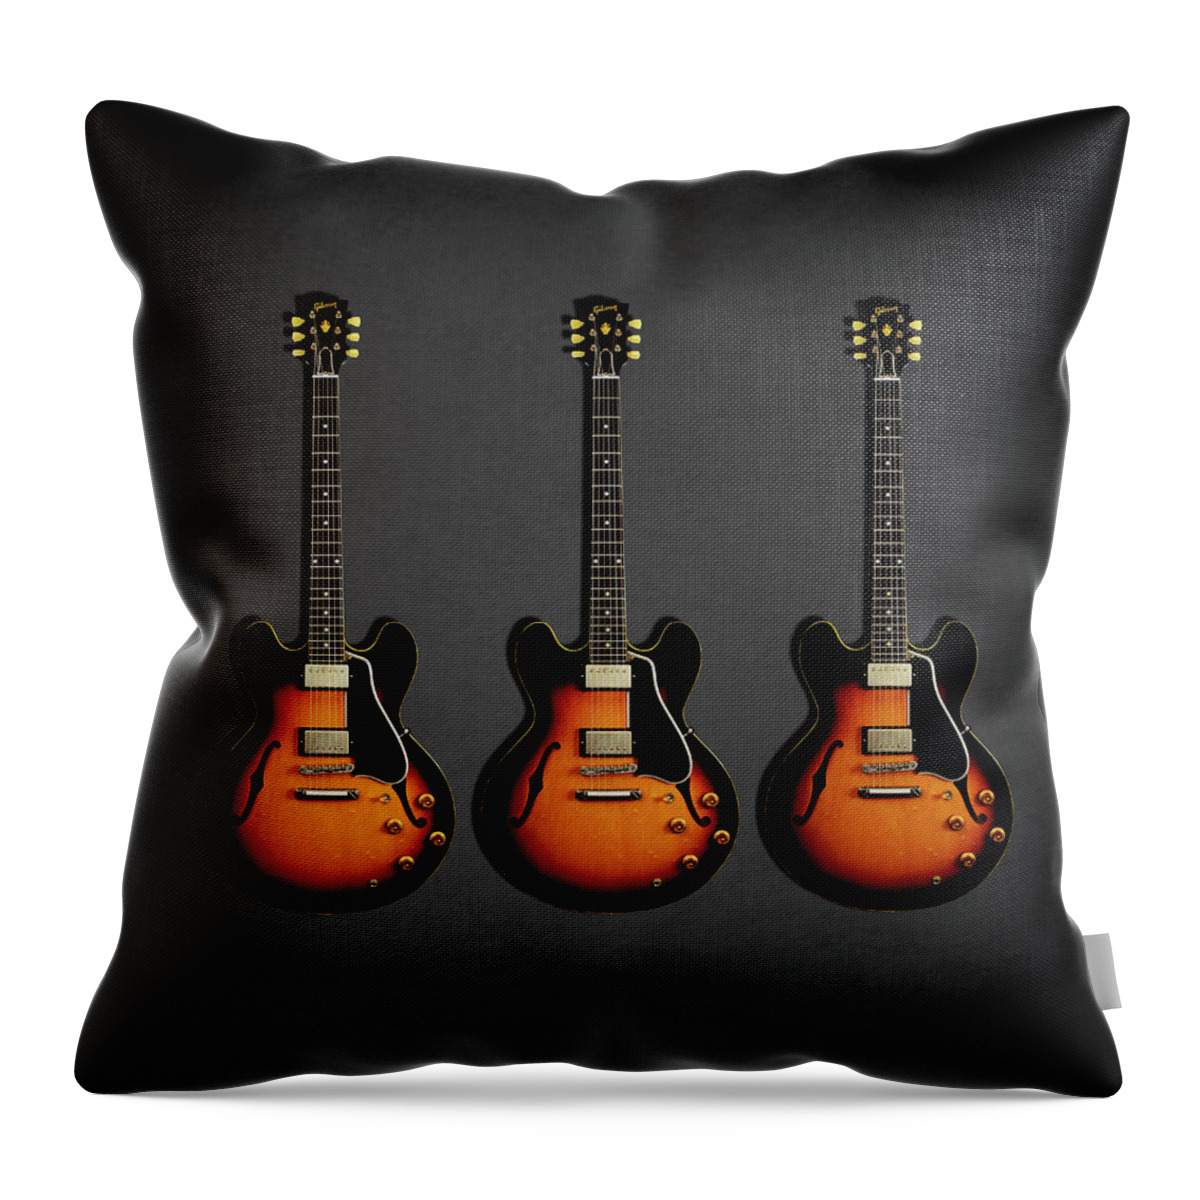 Gibson Electric Guitar Collection Zip Pouch by Mark Rogan - Pixels